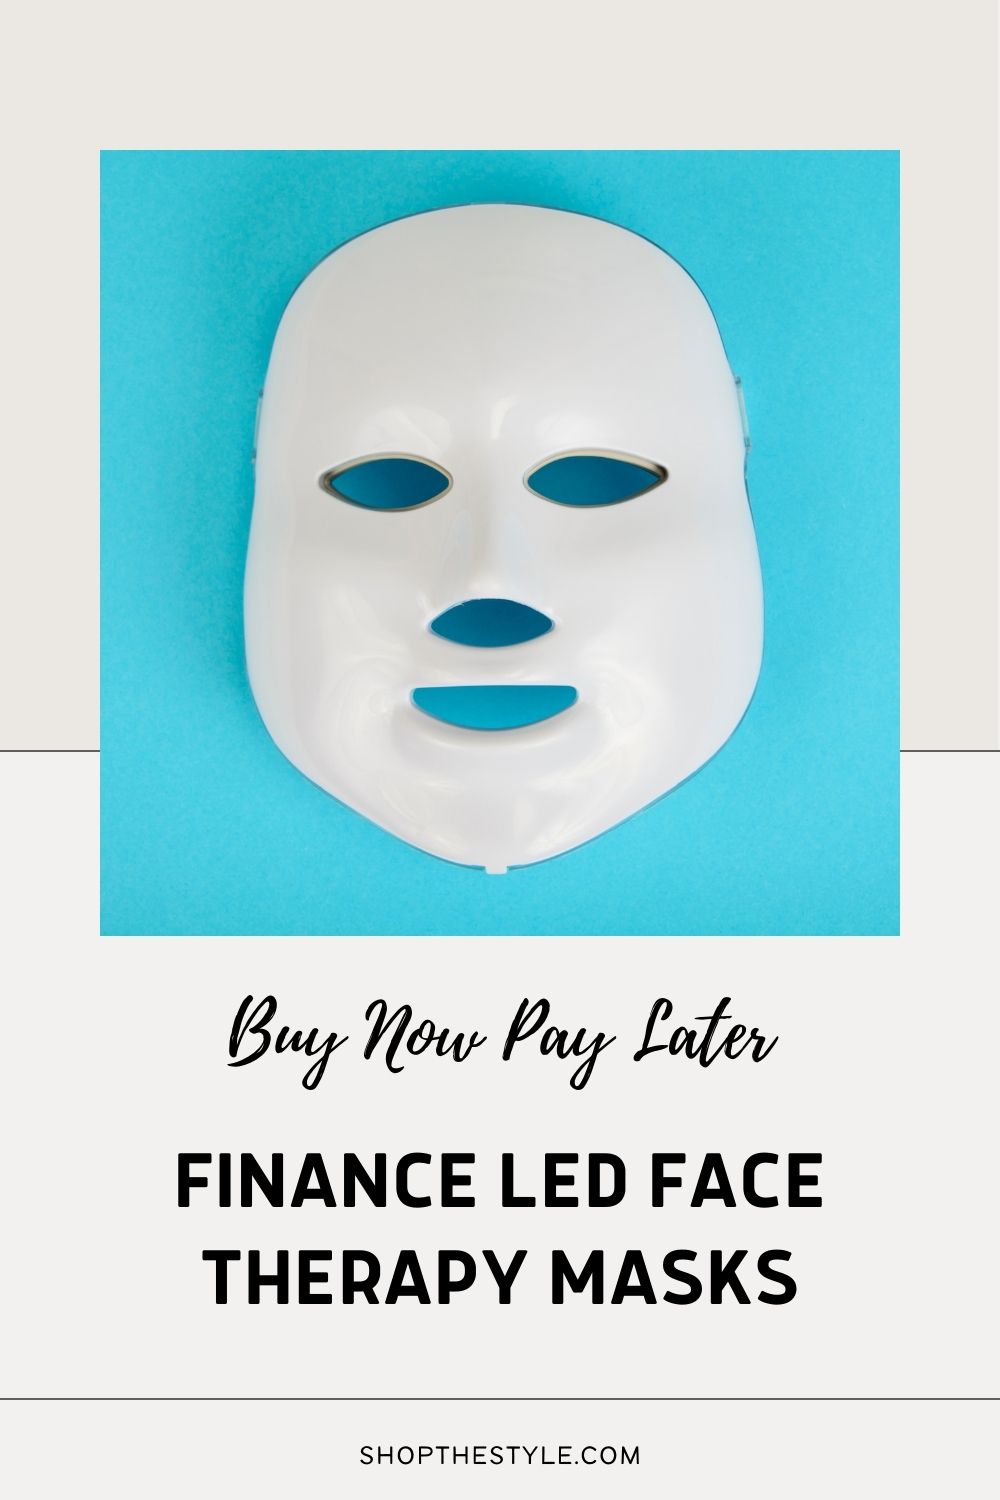 Buy Now Pay Later Finance LED Face Therapy Masks